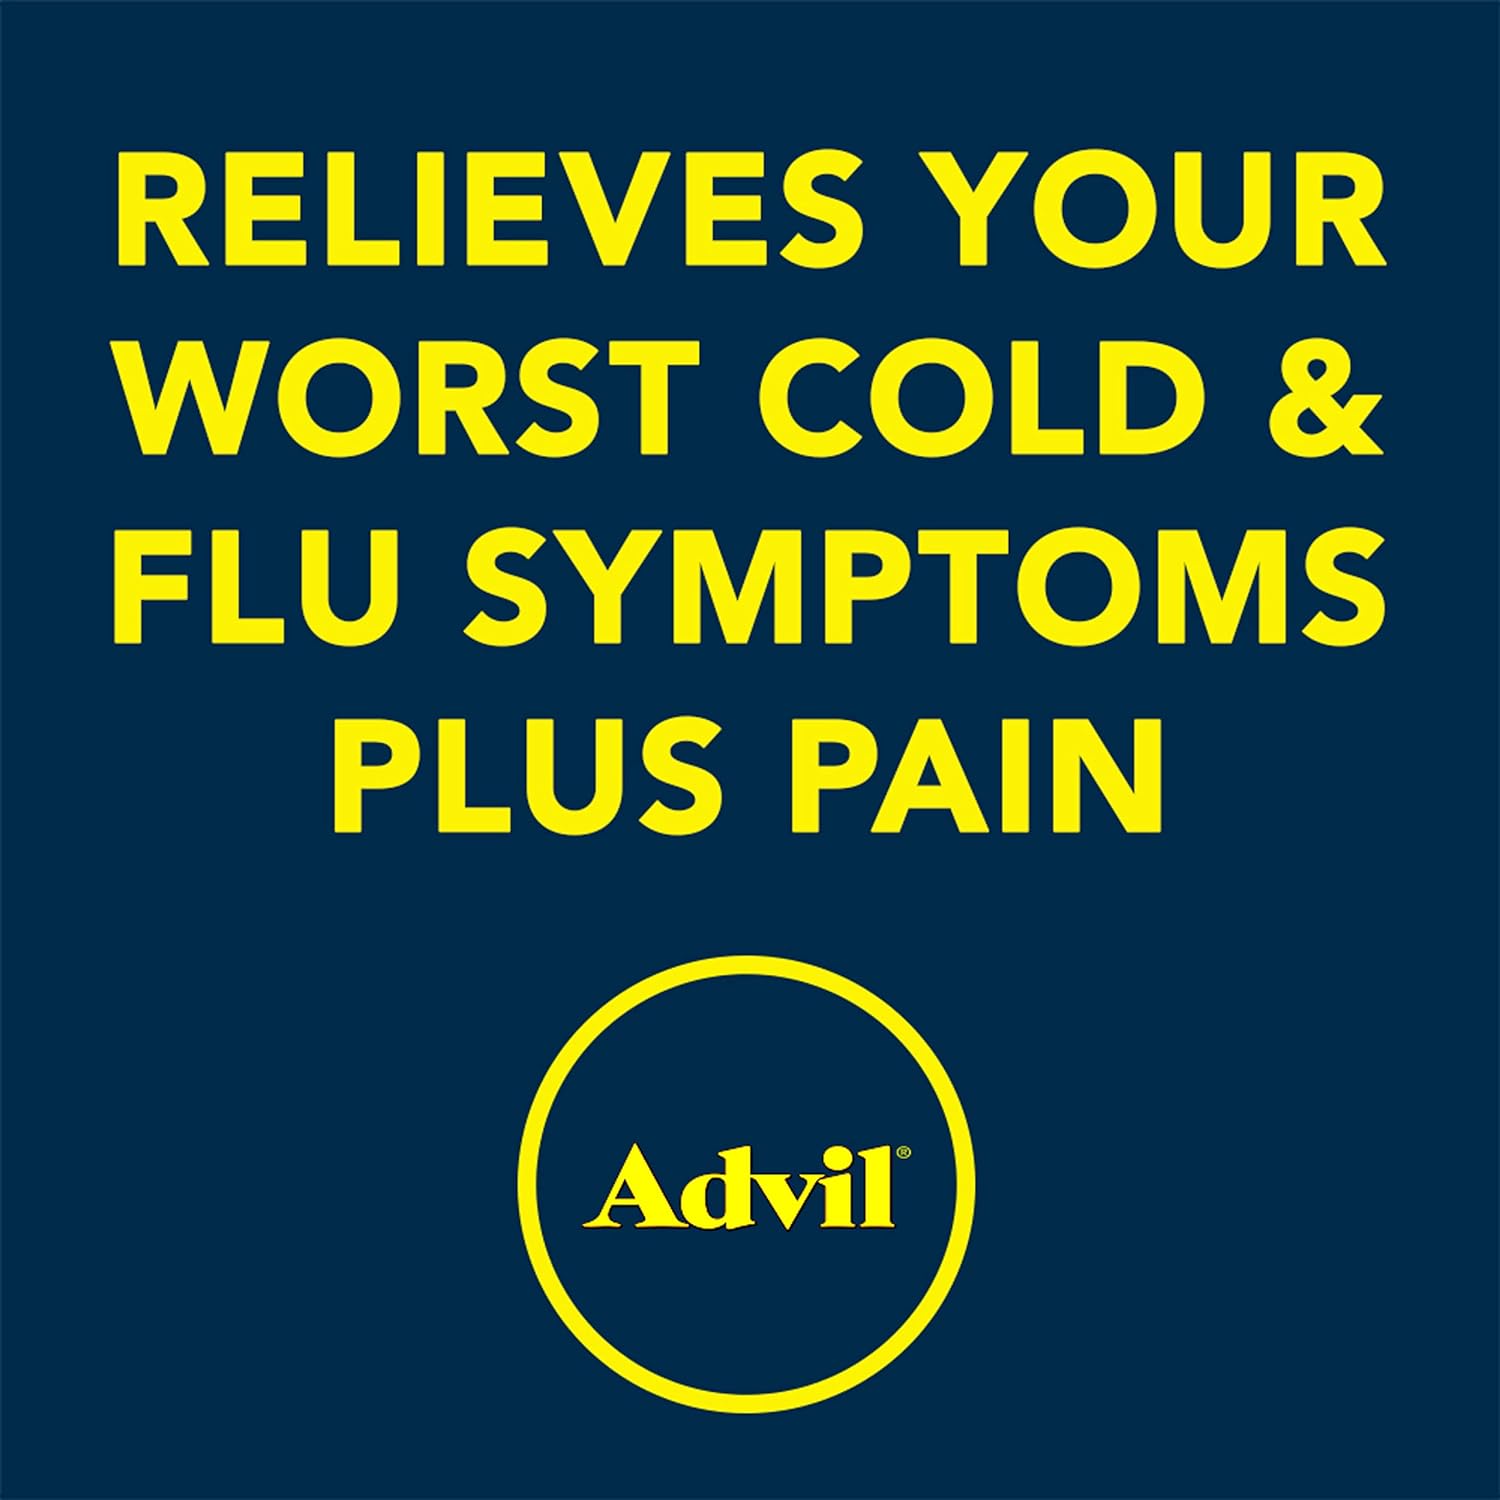 Advil Multi Symptom Cold and Flu Medicine, Cold Medicine for Adults with Ibuprofen, Phenylephrine HCL and Chlorpheniramine Maleate - 20 Coated Tablets : Health & Household